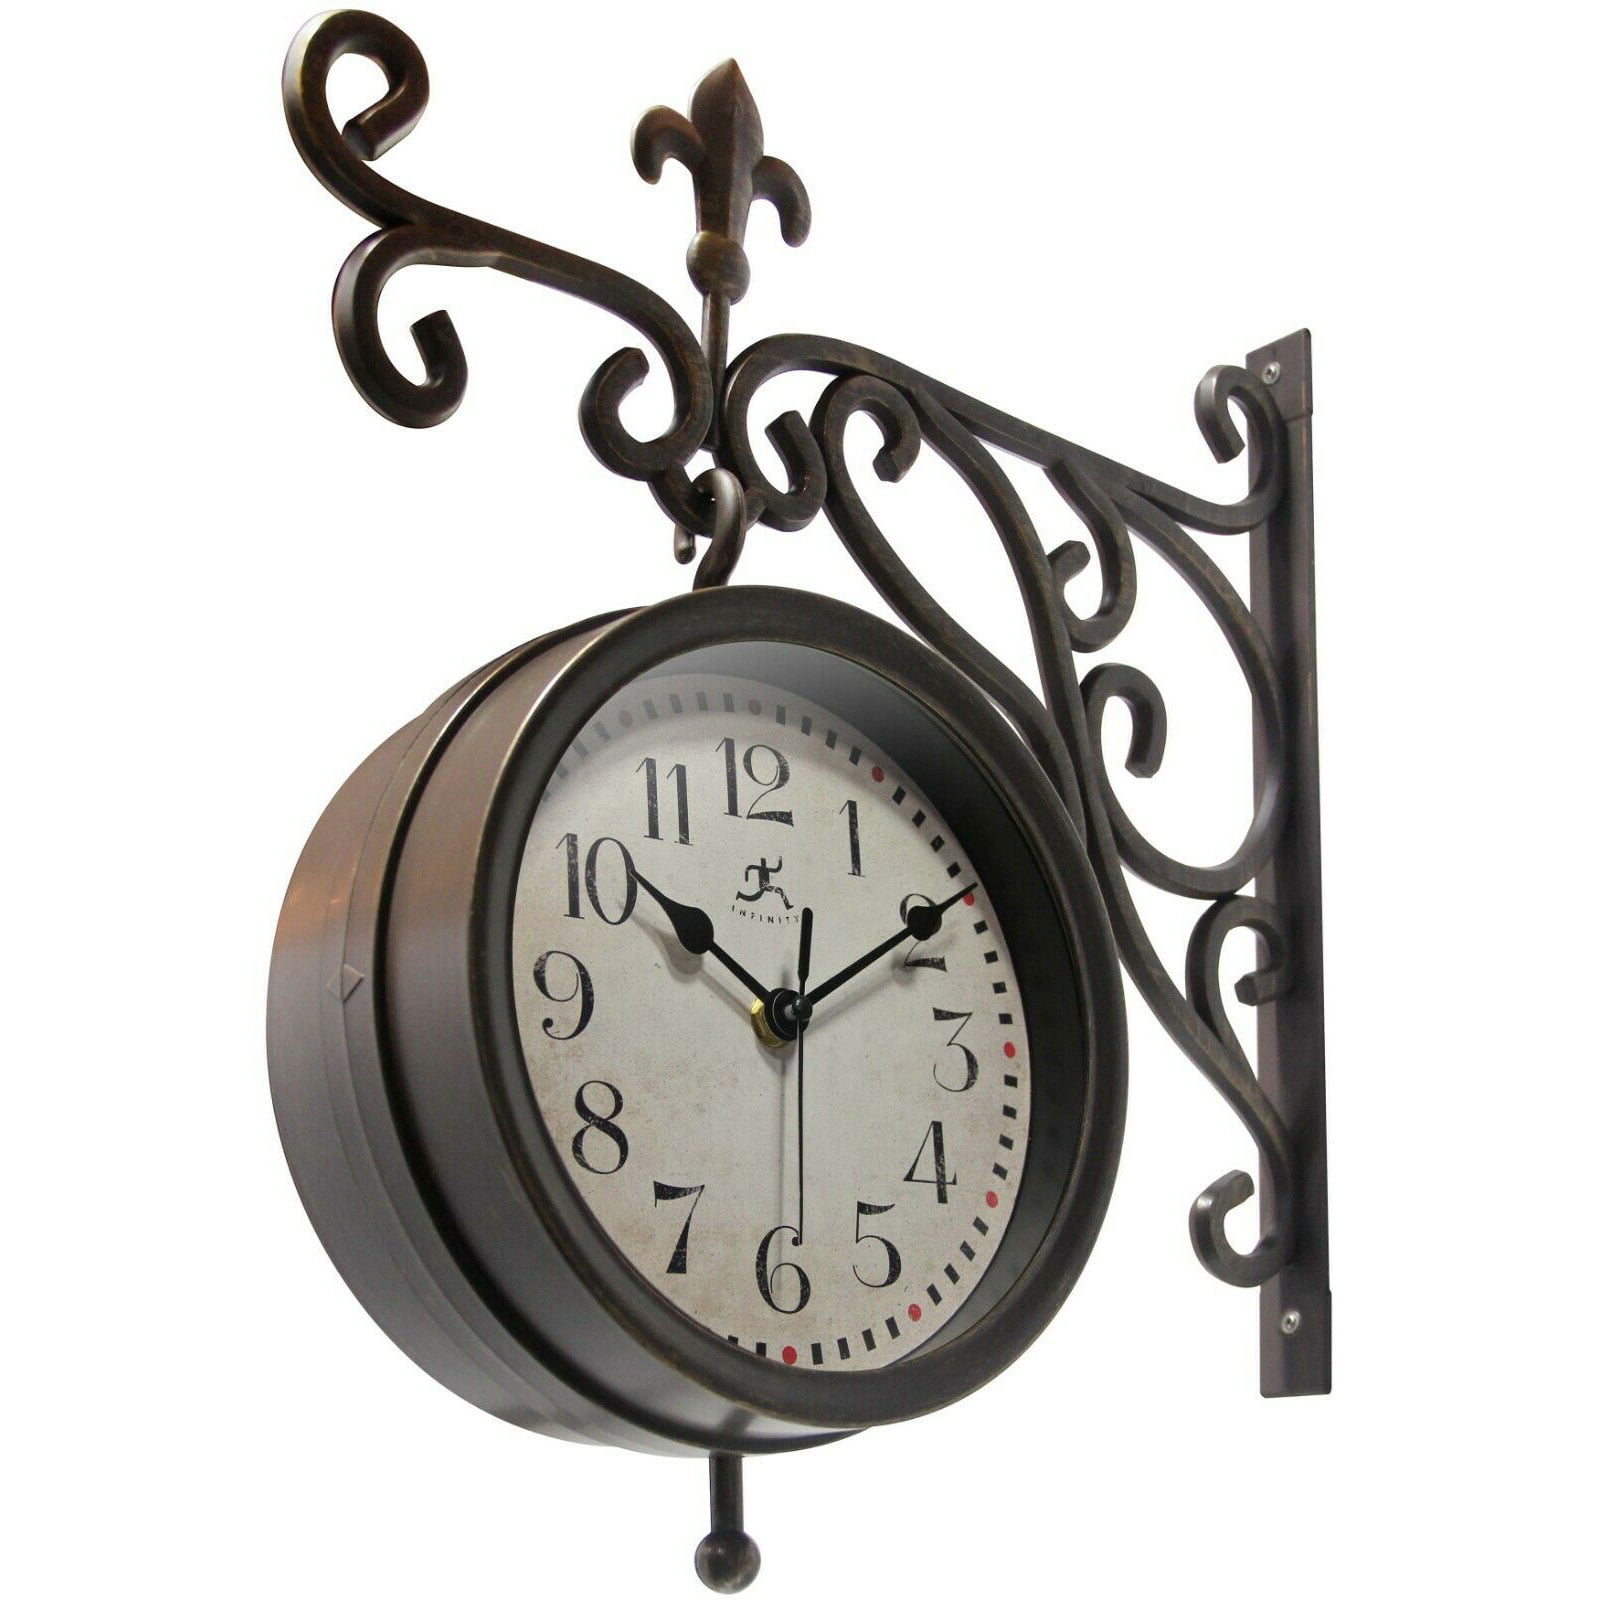 Sunburst 22.5 Indoor/Outdoor Wall Clock with Hygrometer and Thermometer  Howard Miller 625543